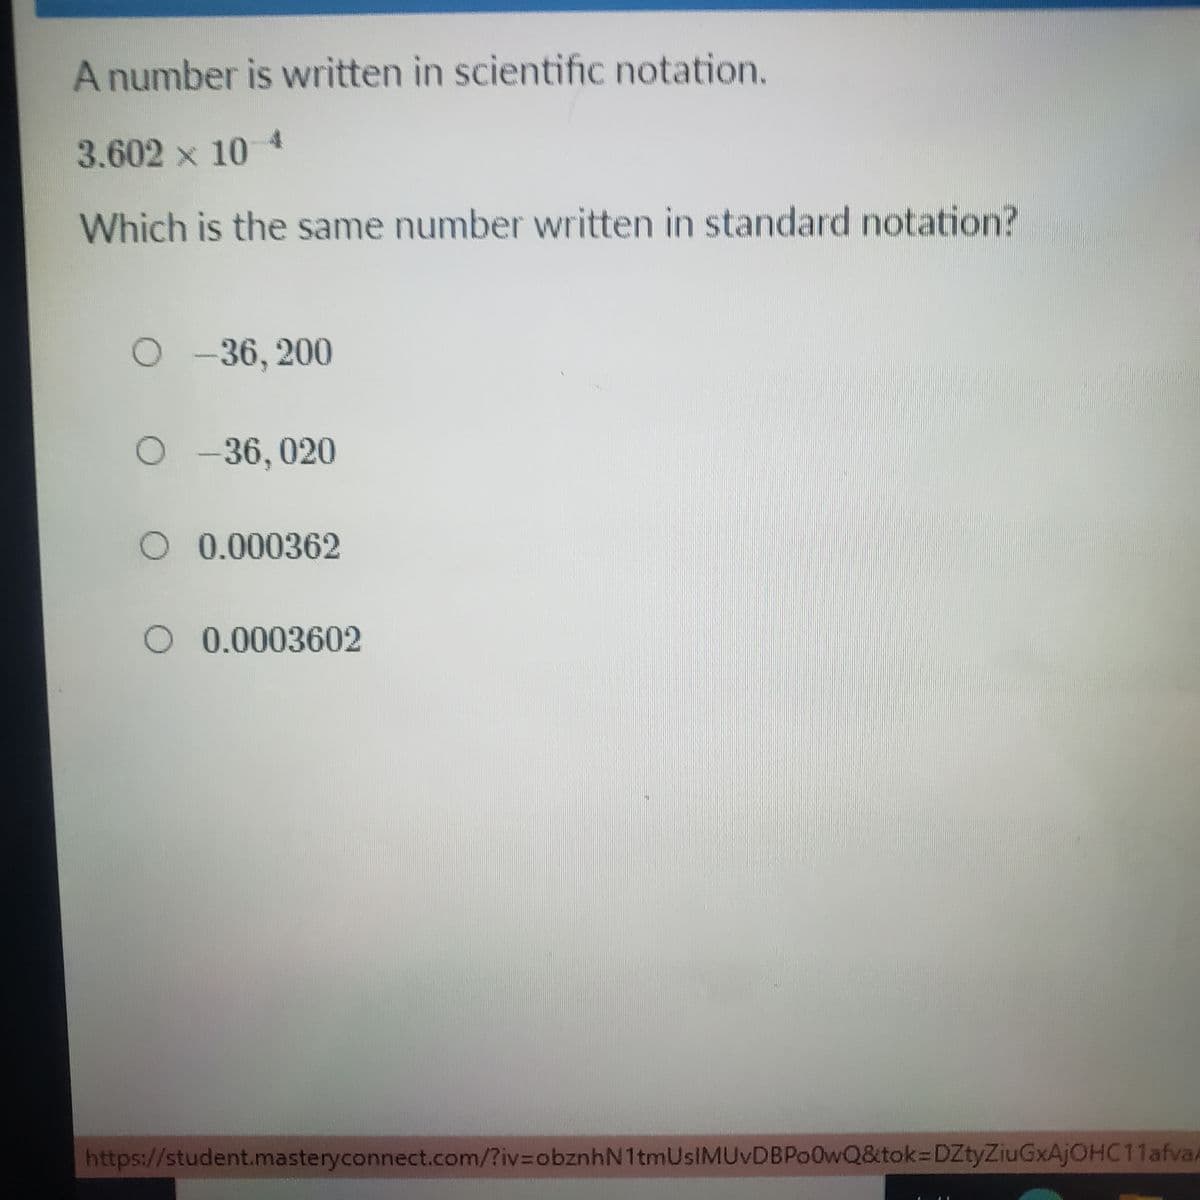 A number is written in scientific notation.
3.602 x 10 4
Which is the same number written in standard notation?
O-36, 200
O-36, 020
O 0.000362
O 0.0003602
https://student.masteryconnect.com/?iv%3DobznhN1tmUsIMUvDBPo0wQ&tok=DZtyZiuGxAjOHC11afva/
